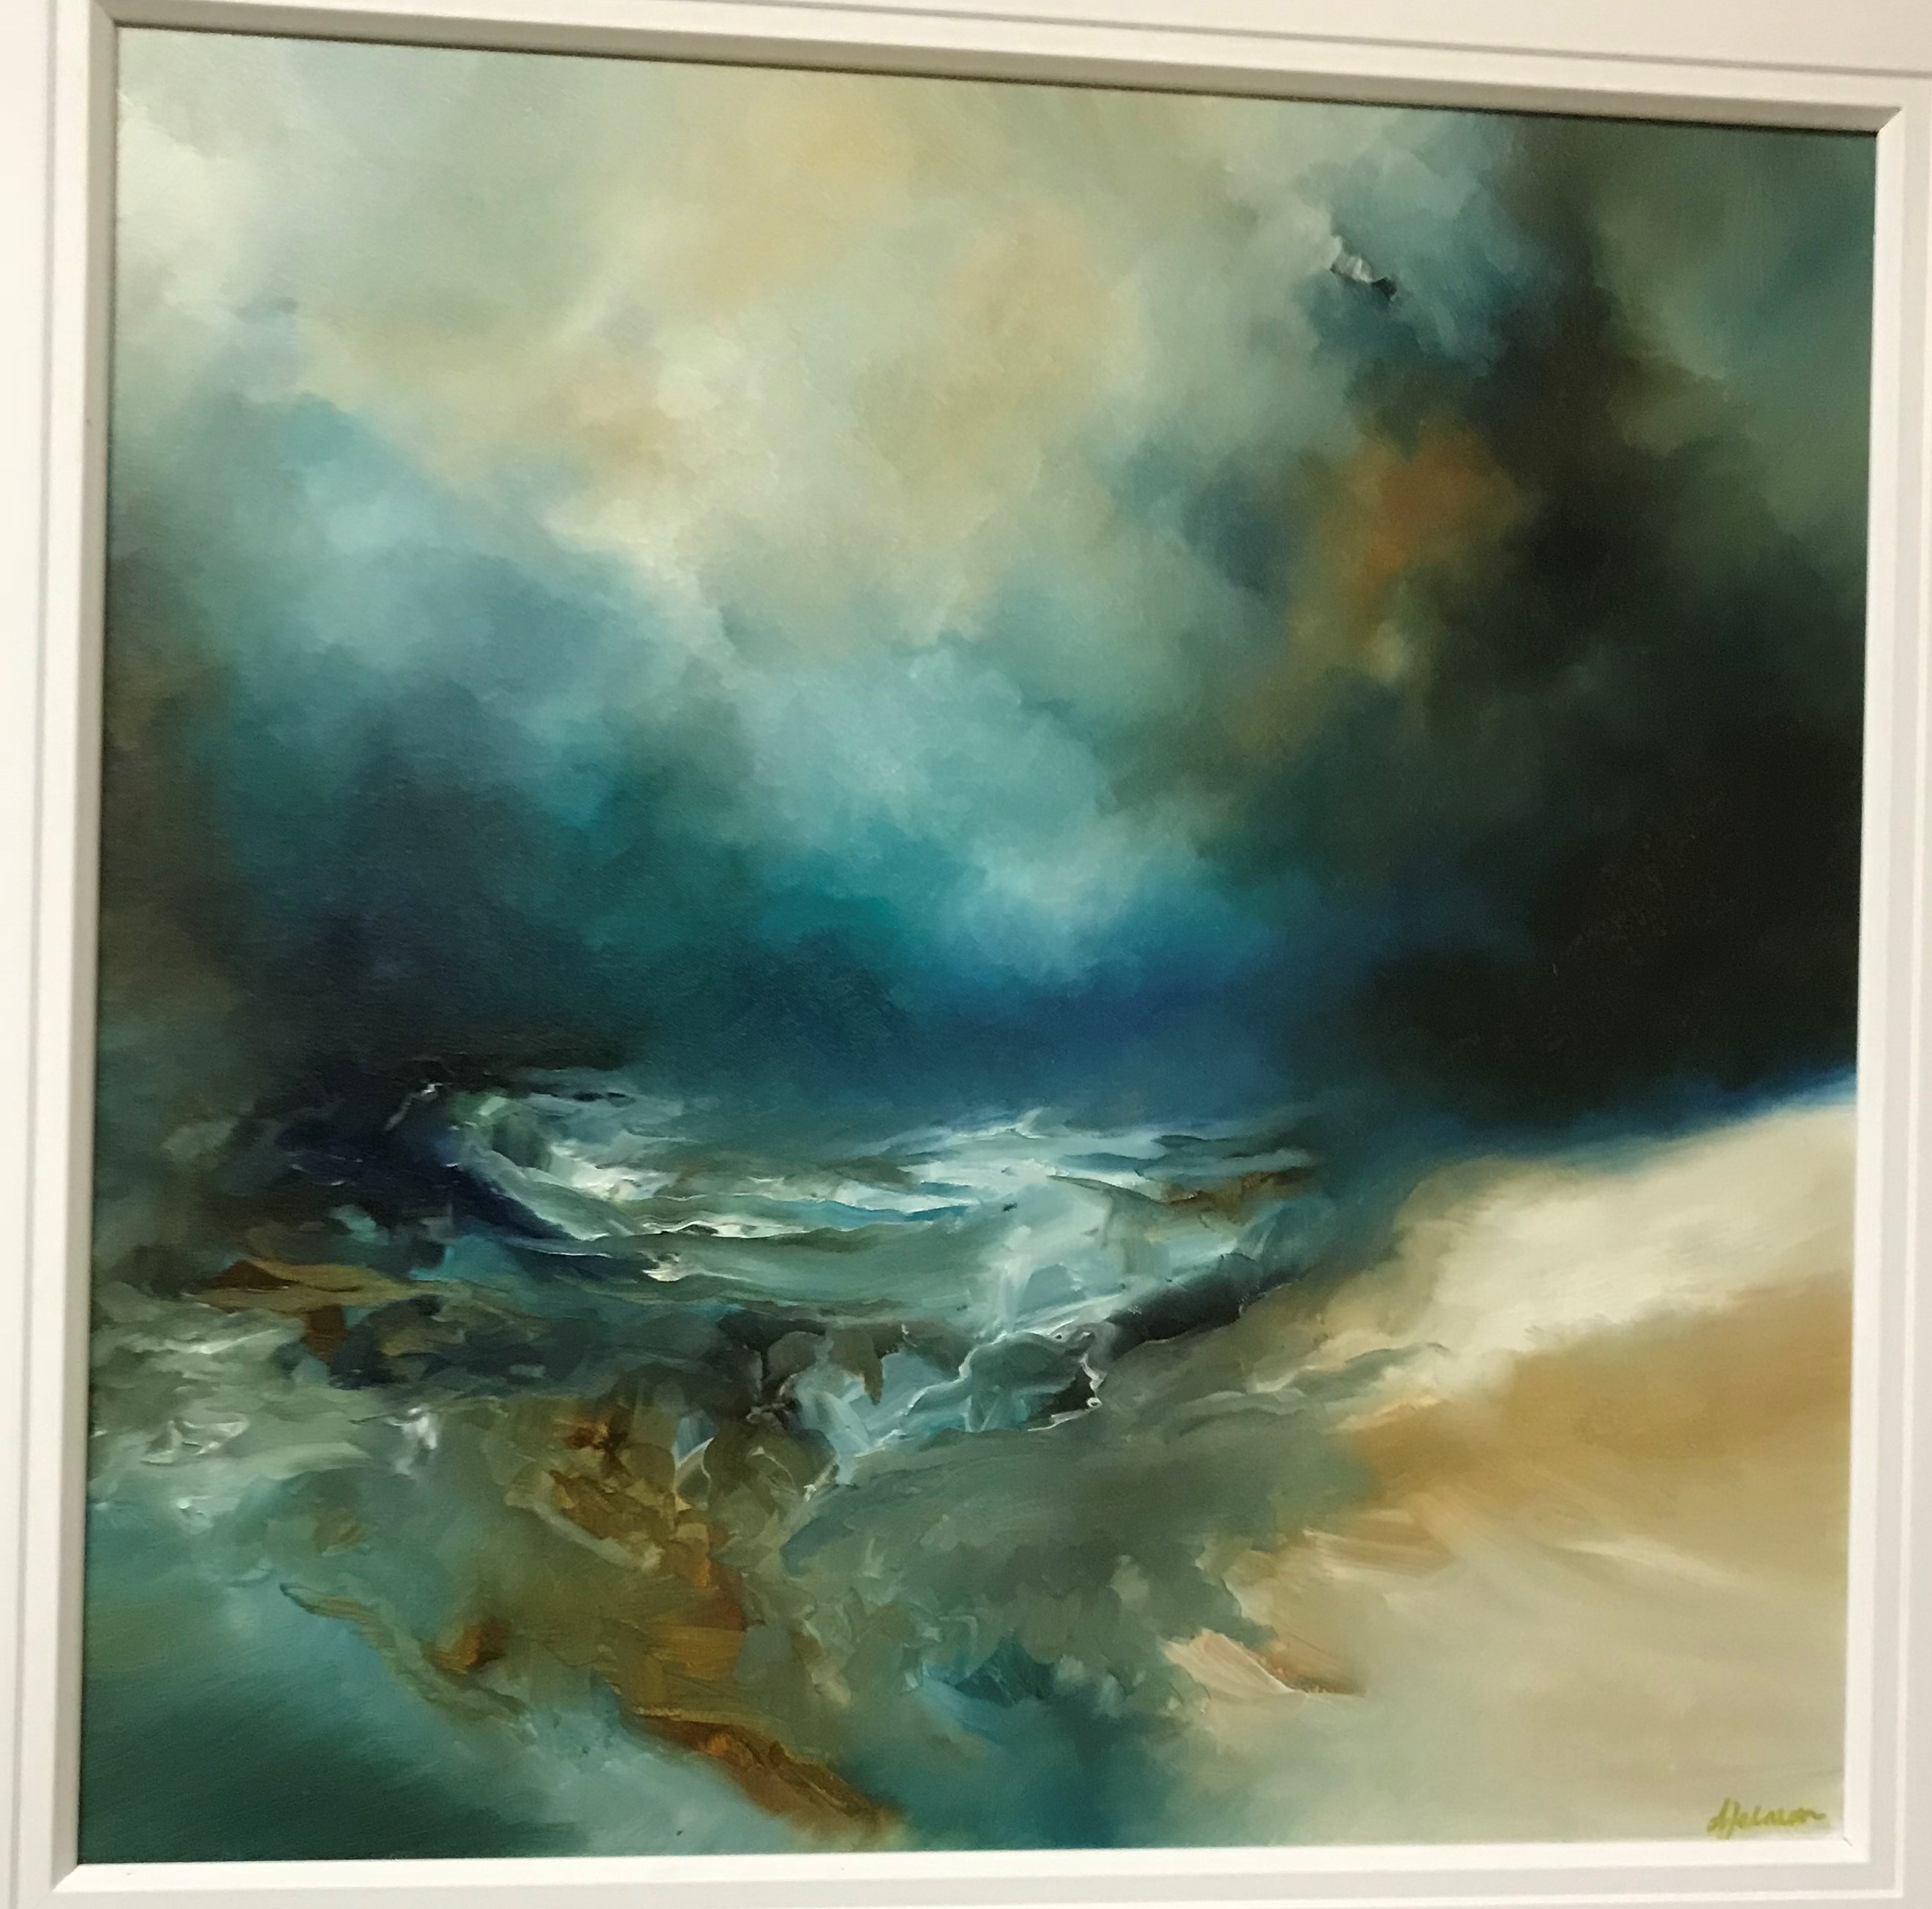 ALISON JOHNSON “Placate”, a stylized coastal landscape, oil on canvas, signed lower right,